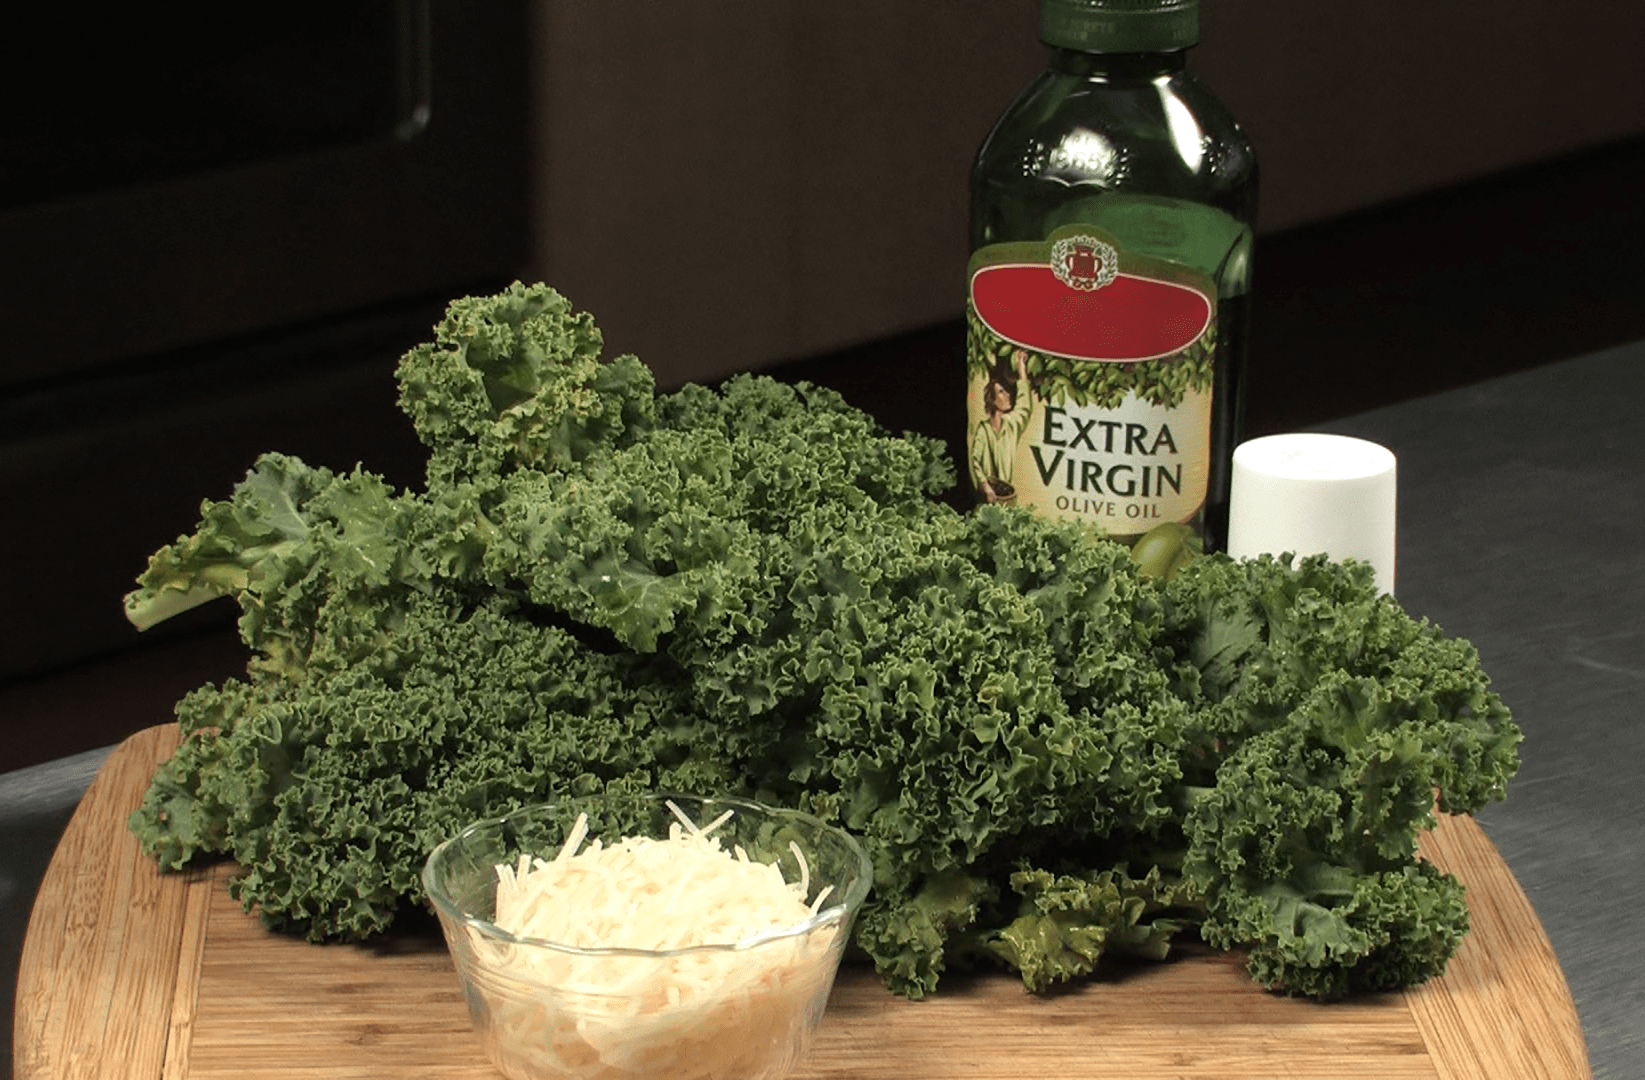 Assemble ingredients. Wash and dry kale.